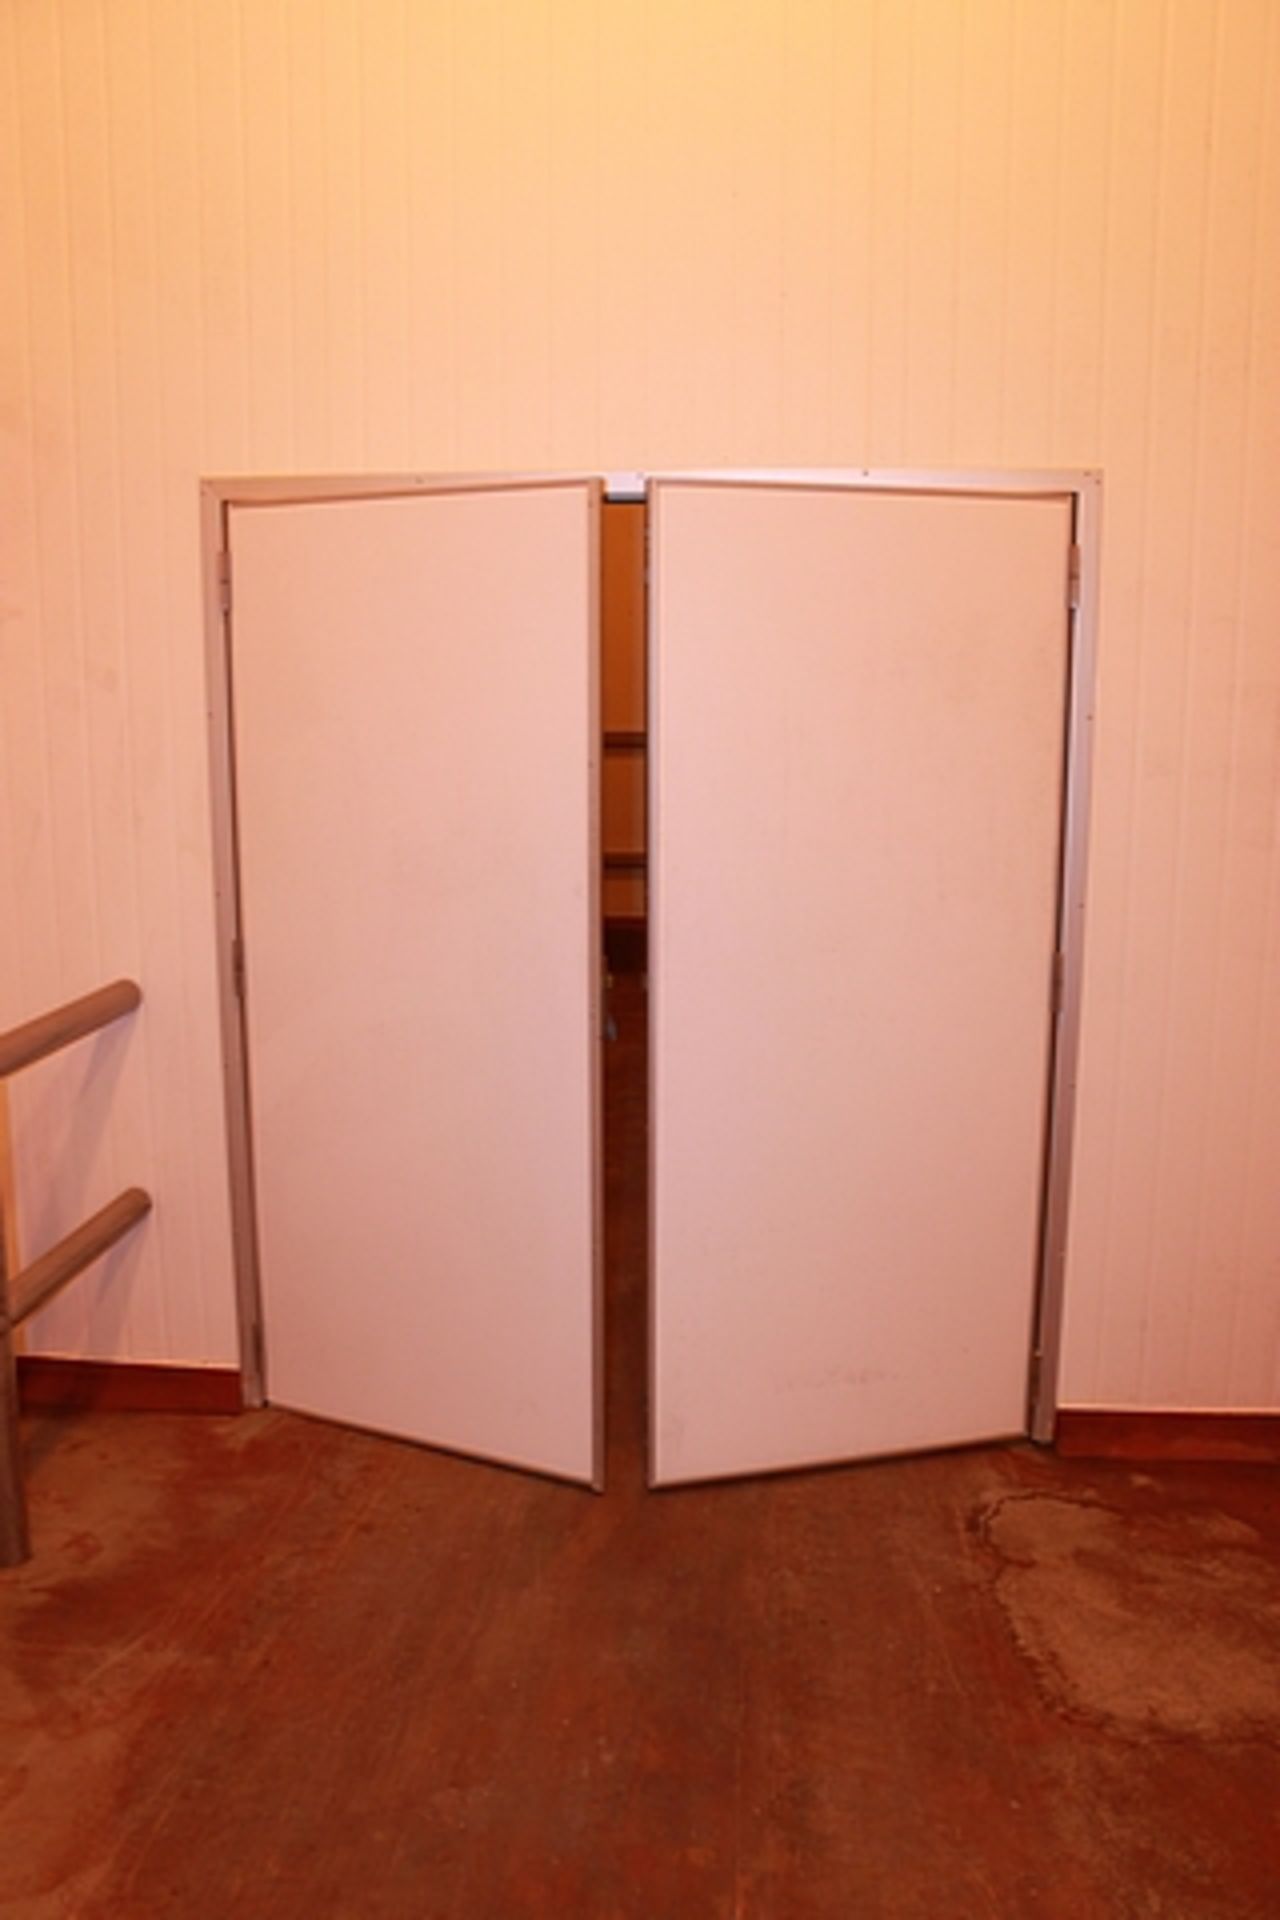 A pair of hinged clad warehouse doors each being 910mm x 2120mm